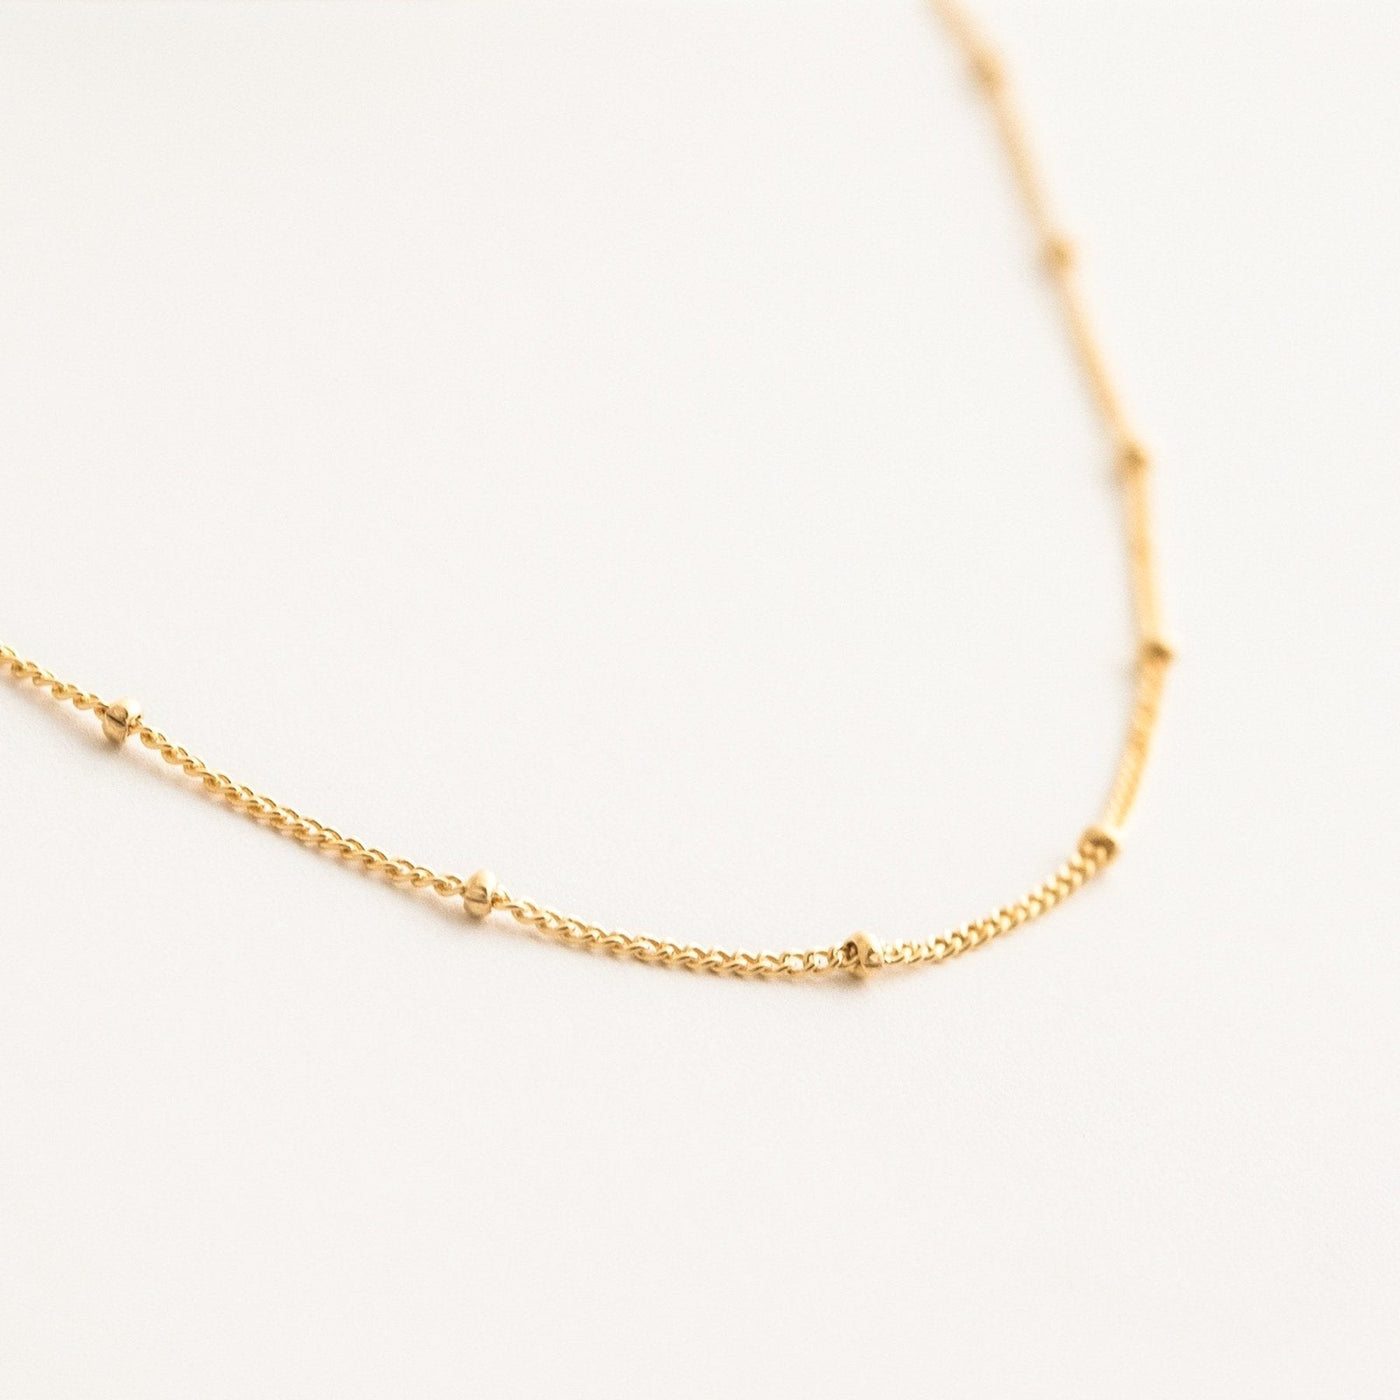 Satellite Necklace by Simple & Dainty Jewelry